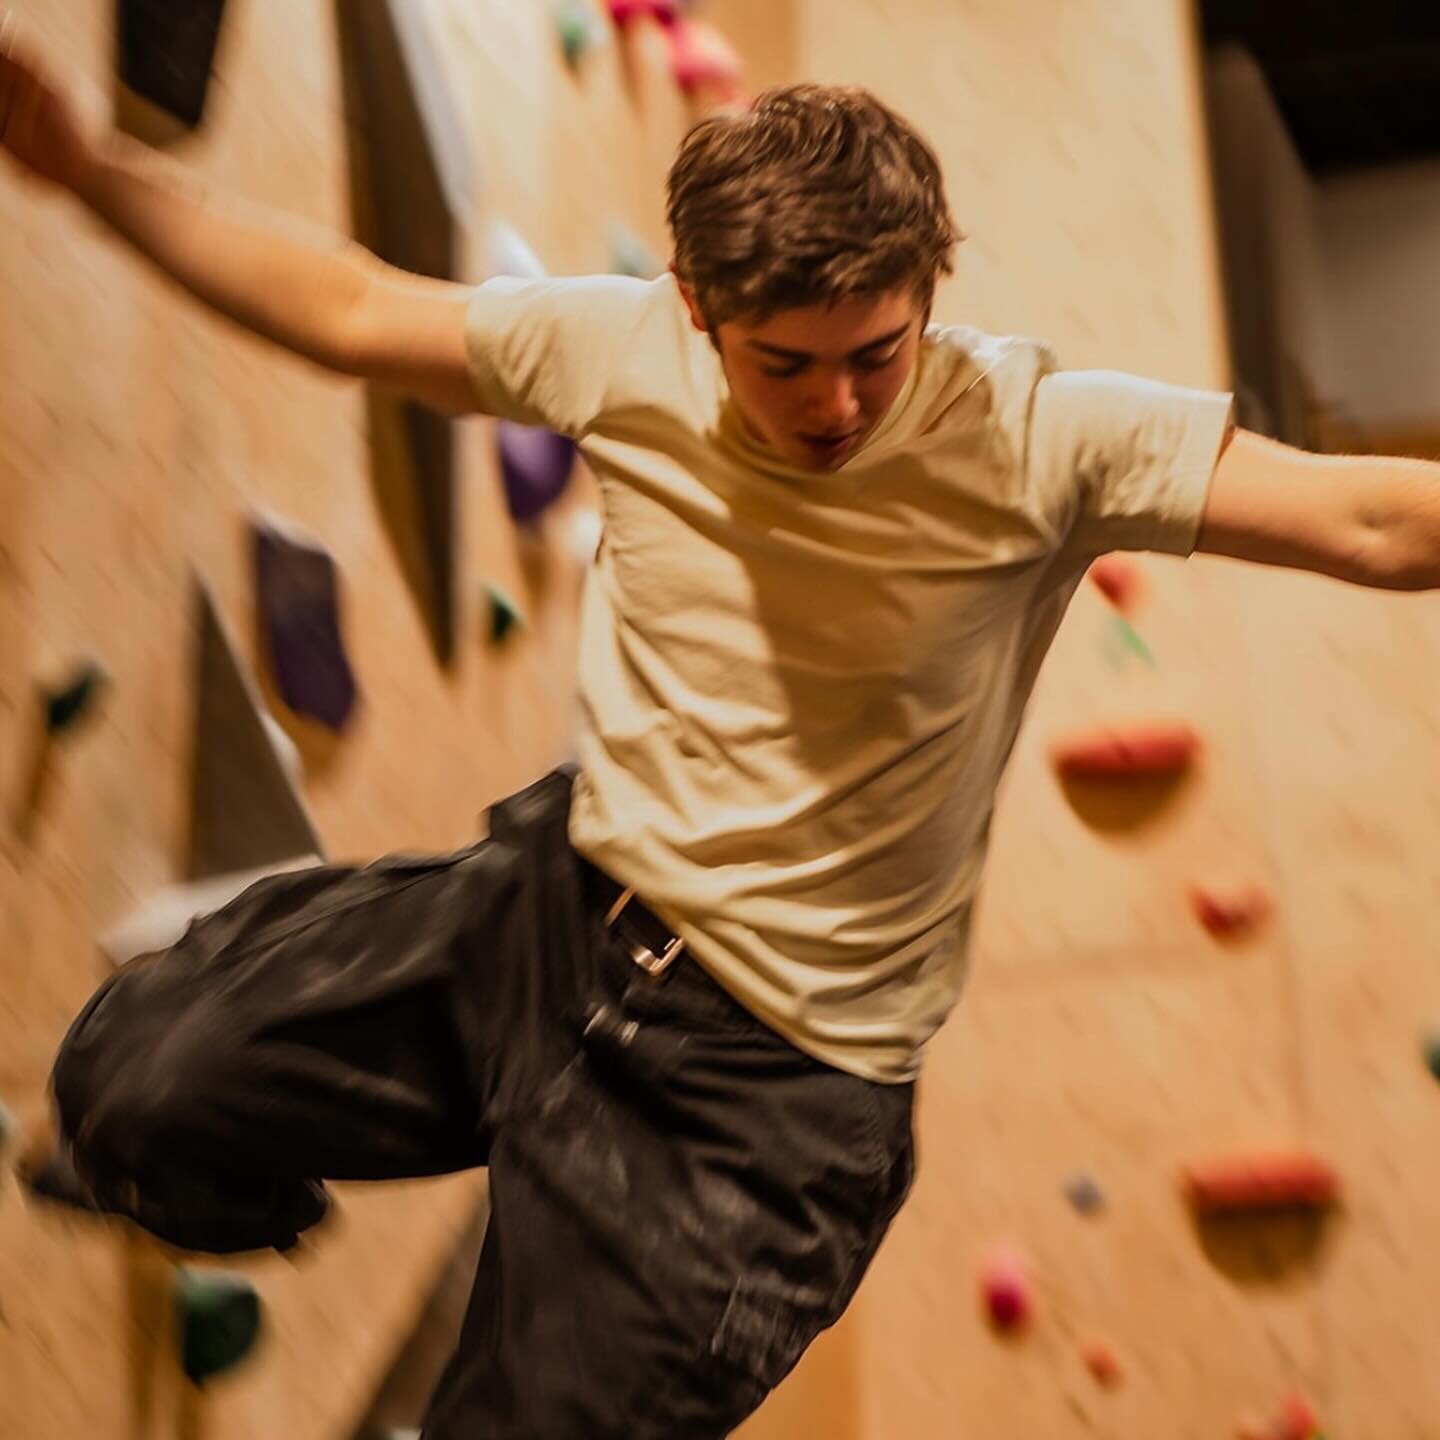 Calling all high schoolers! 

📣 Mondays just got a whole lot better at CLIMB @ The Loop! Enjoy a special discounted rate of $10 for climbing from 5-8pm. Whether you&rsquo;re a seasoned climber or trying it out for the first time, join us for some hi